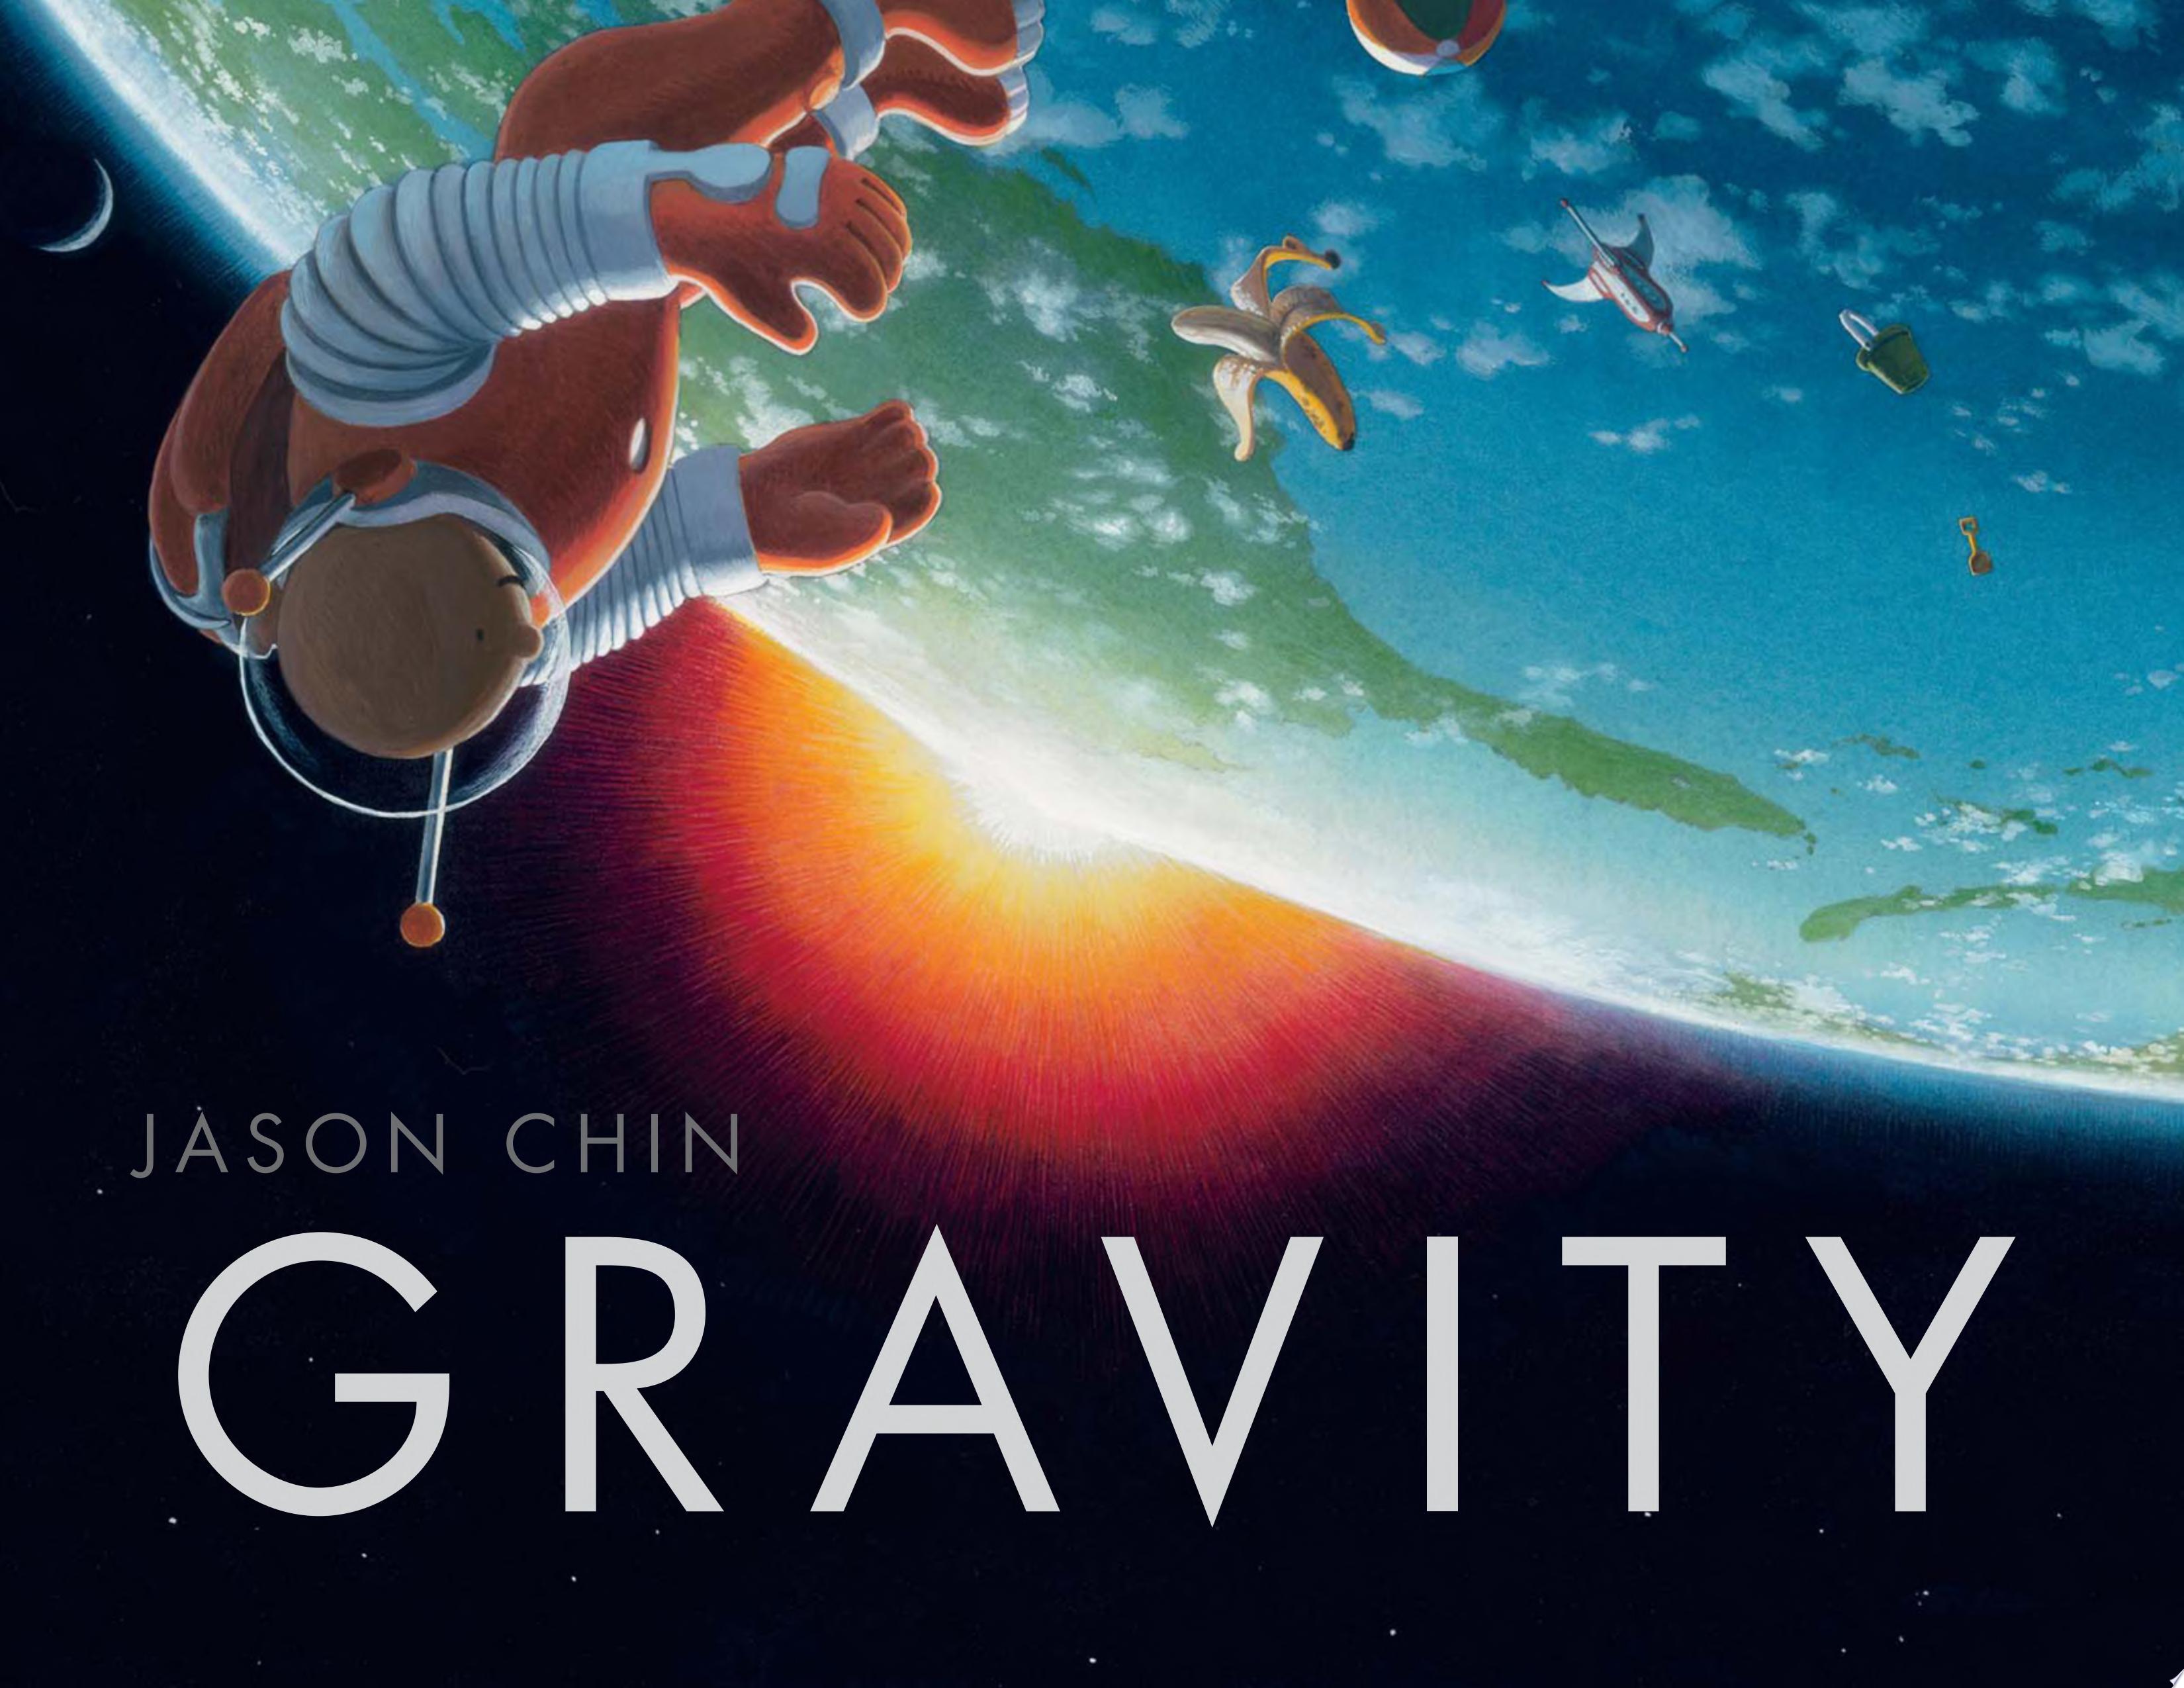 Image for "Gravity"